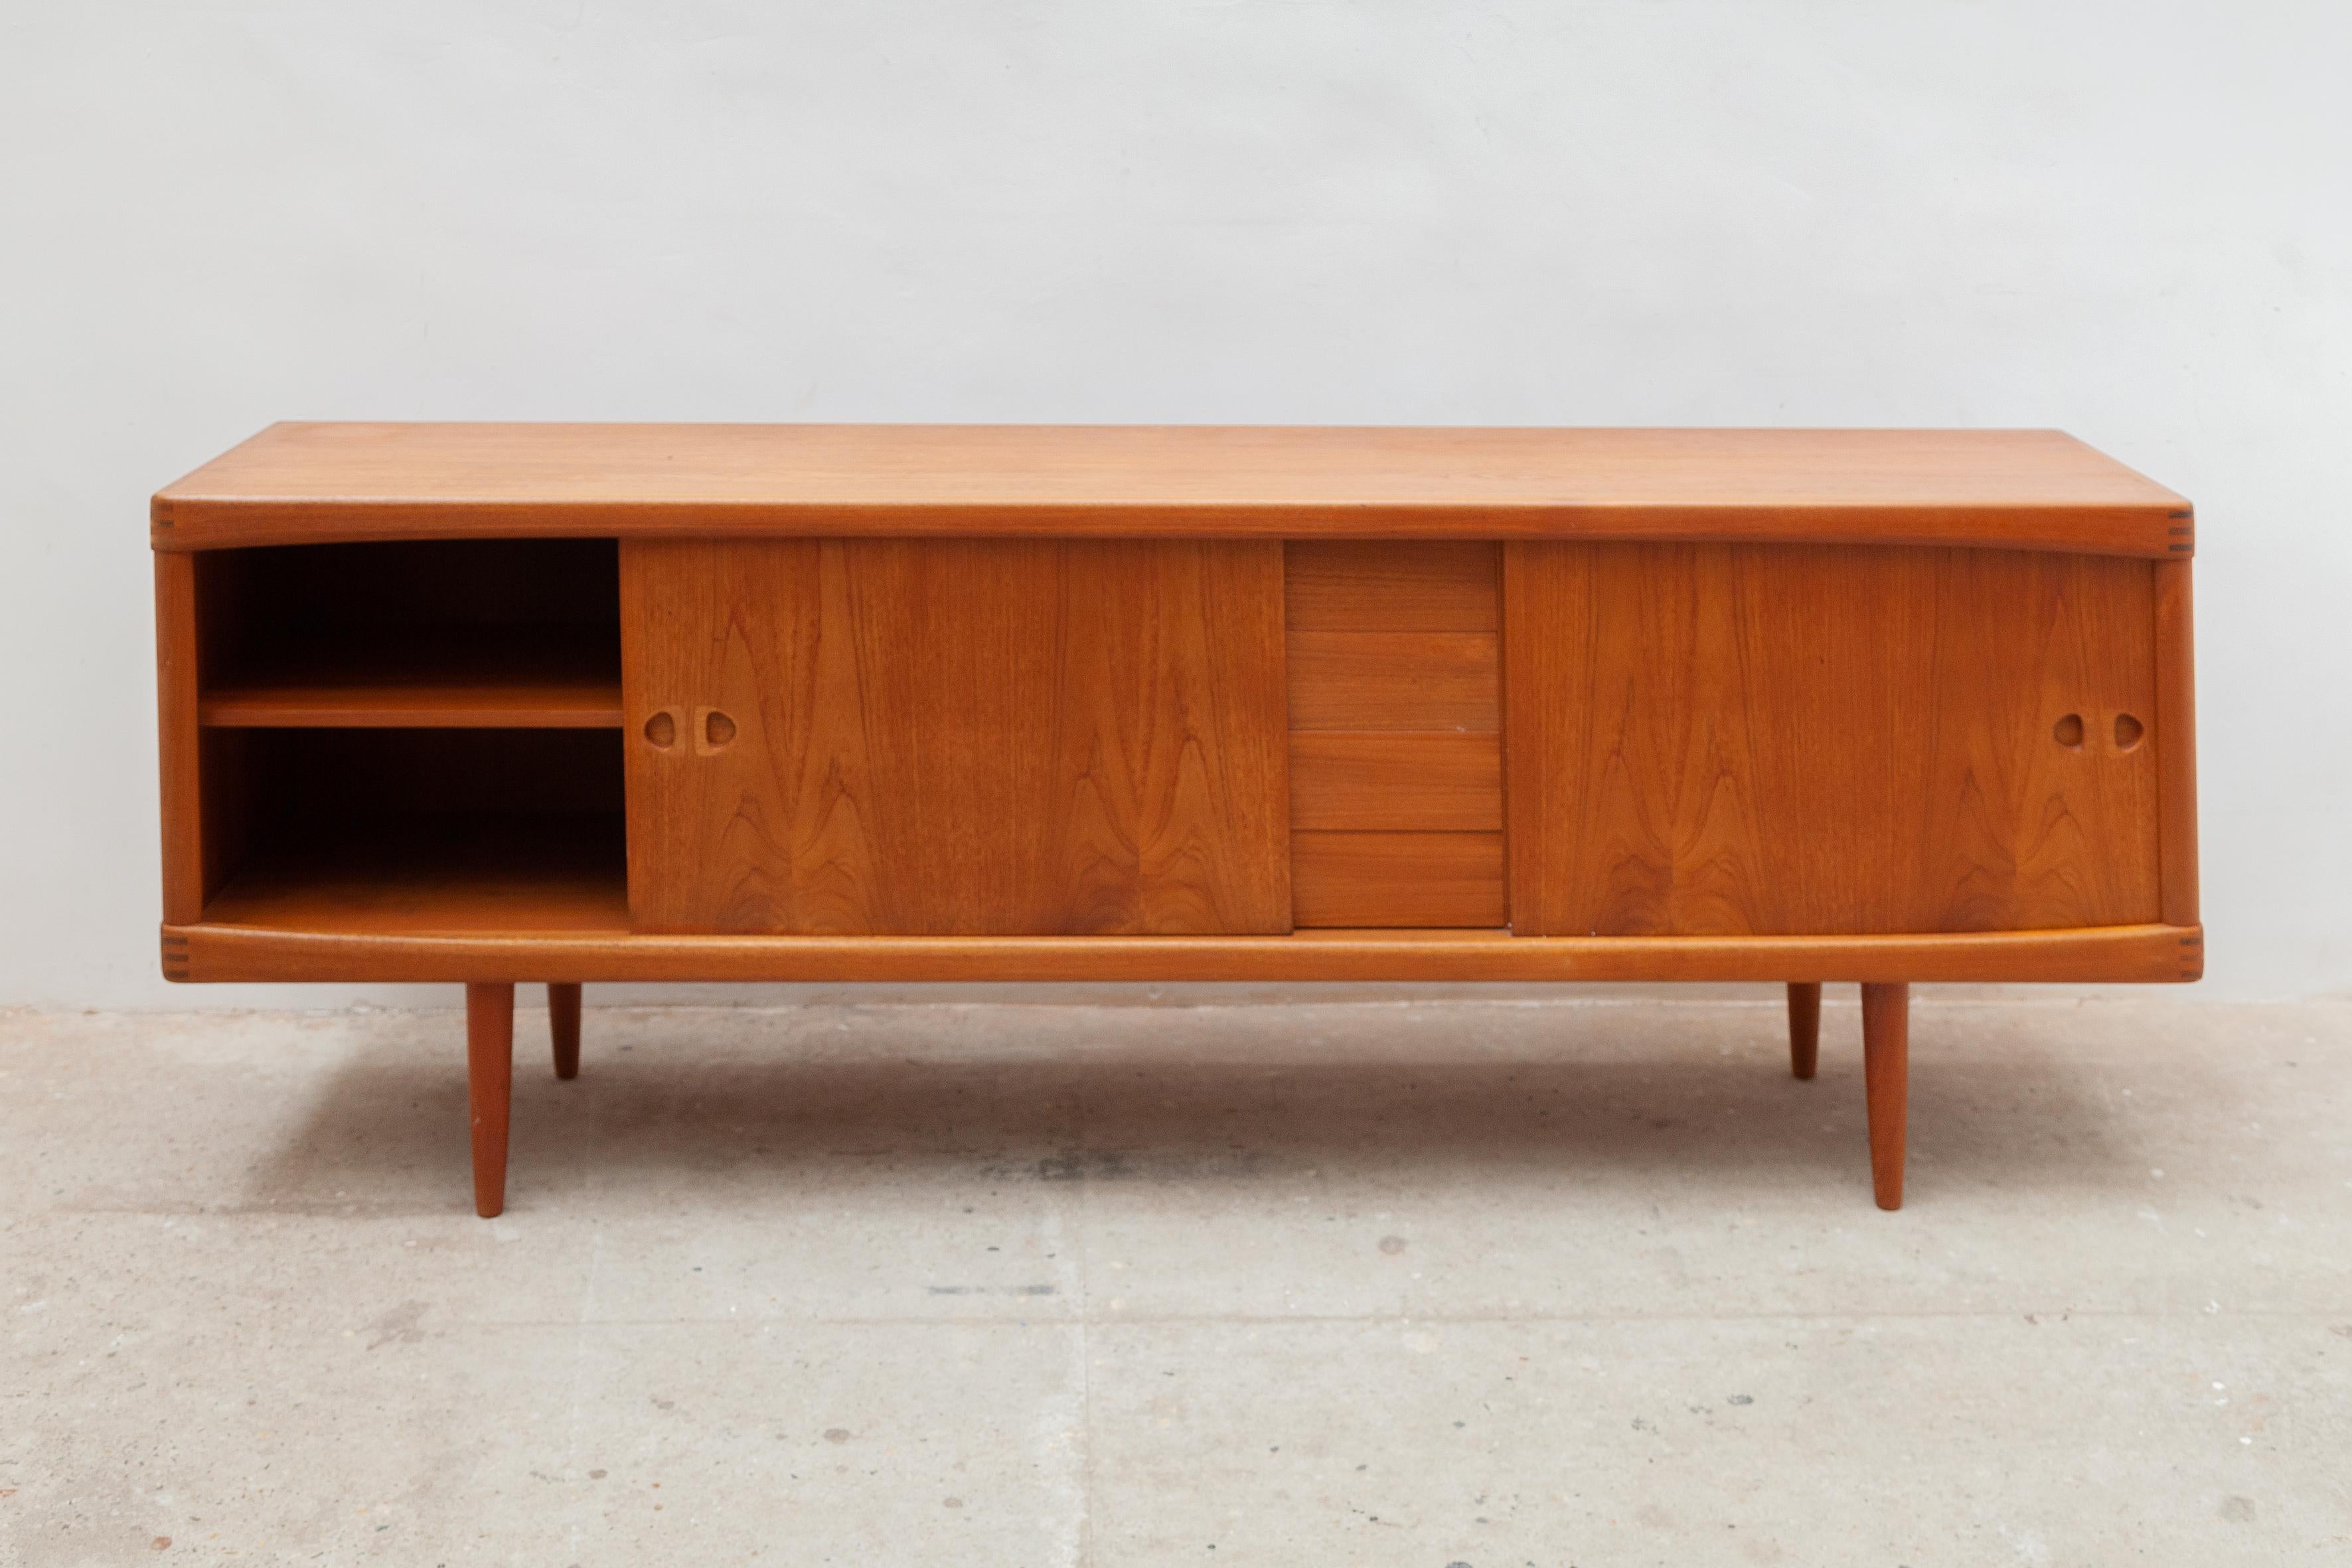 Sideboard high-quality cabinet in teak veneer with two sliding doors, four drawers, two shelves designed by H.W.Klein for Bramin his design are characteristic of the postwar Danish modern style, typically involving fine woods like teak and well